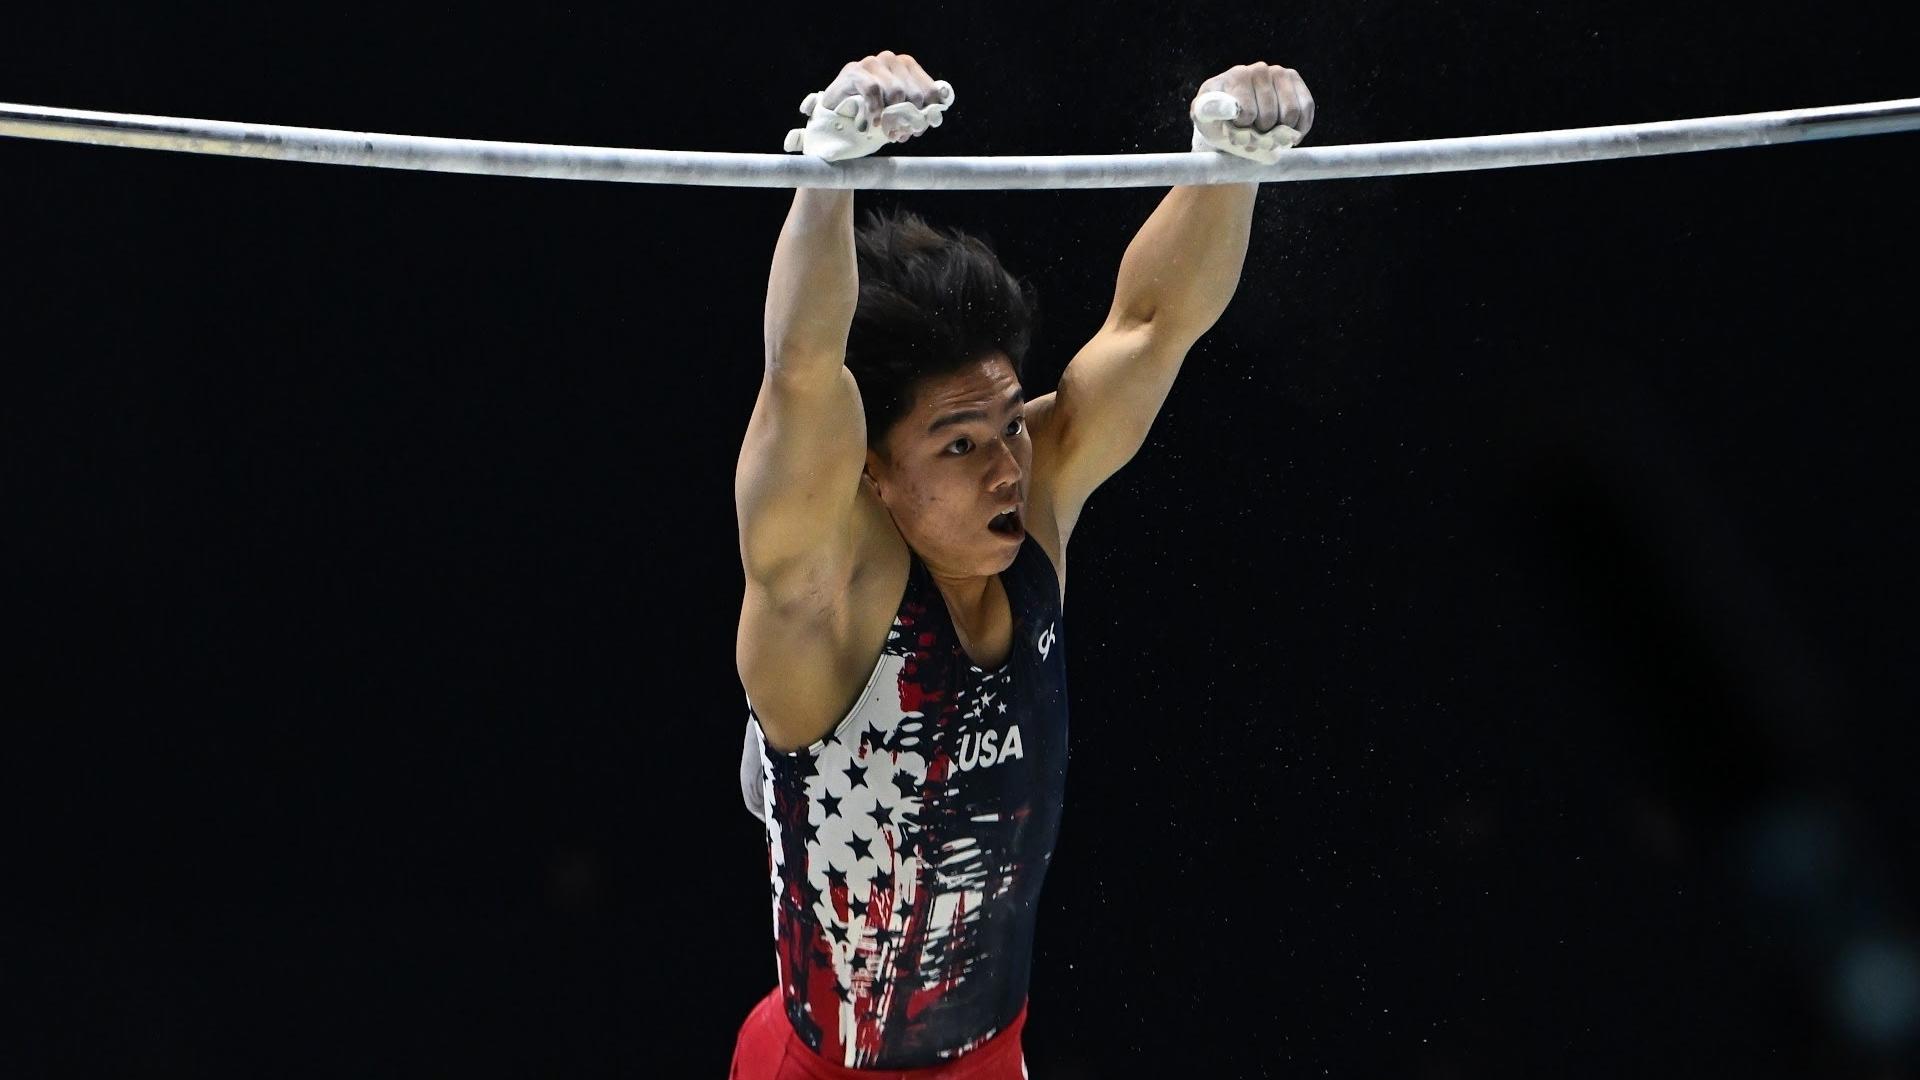 Asher Hong catches his Kolman release on high bar by his grips during the final rotation of the men's all-around final at the 2022 World Gymnastics Championships.